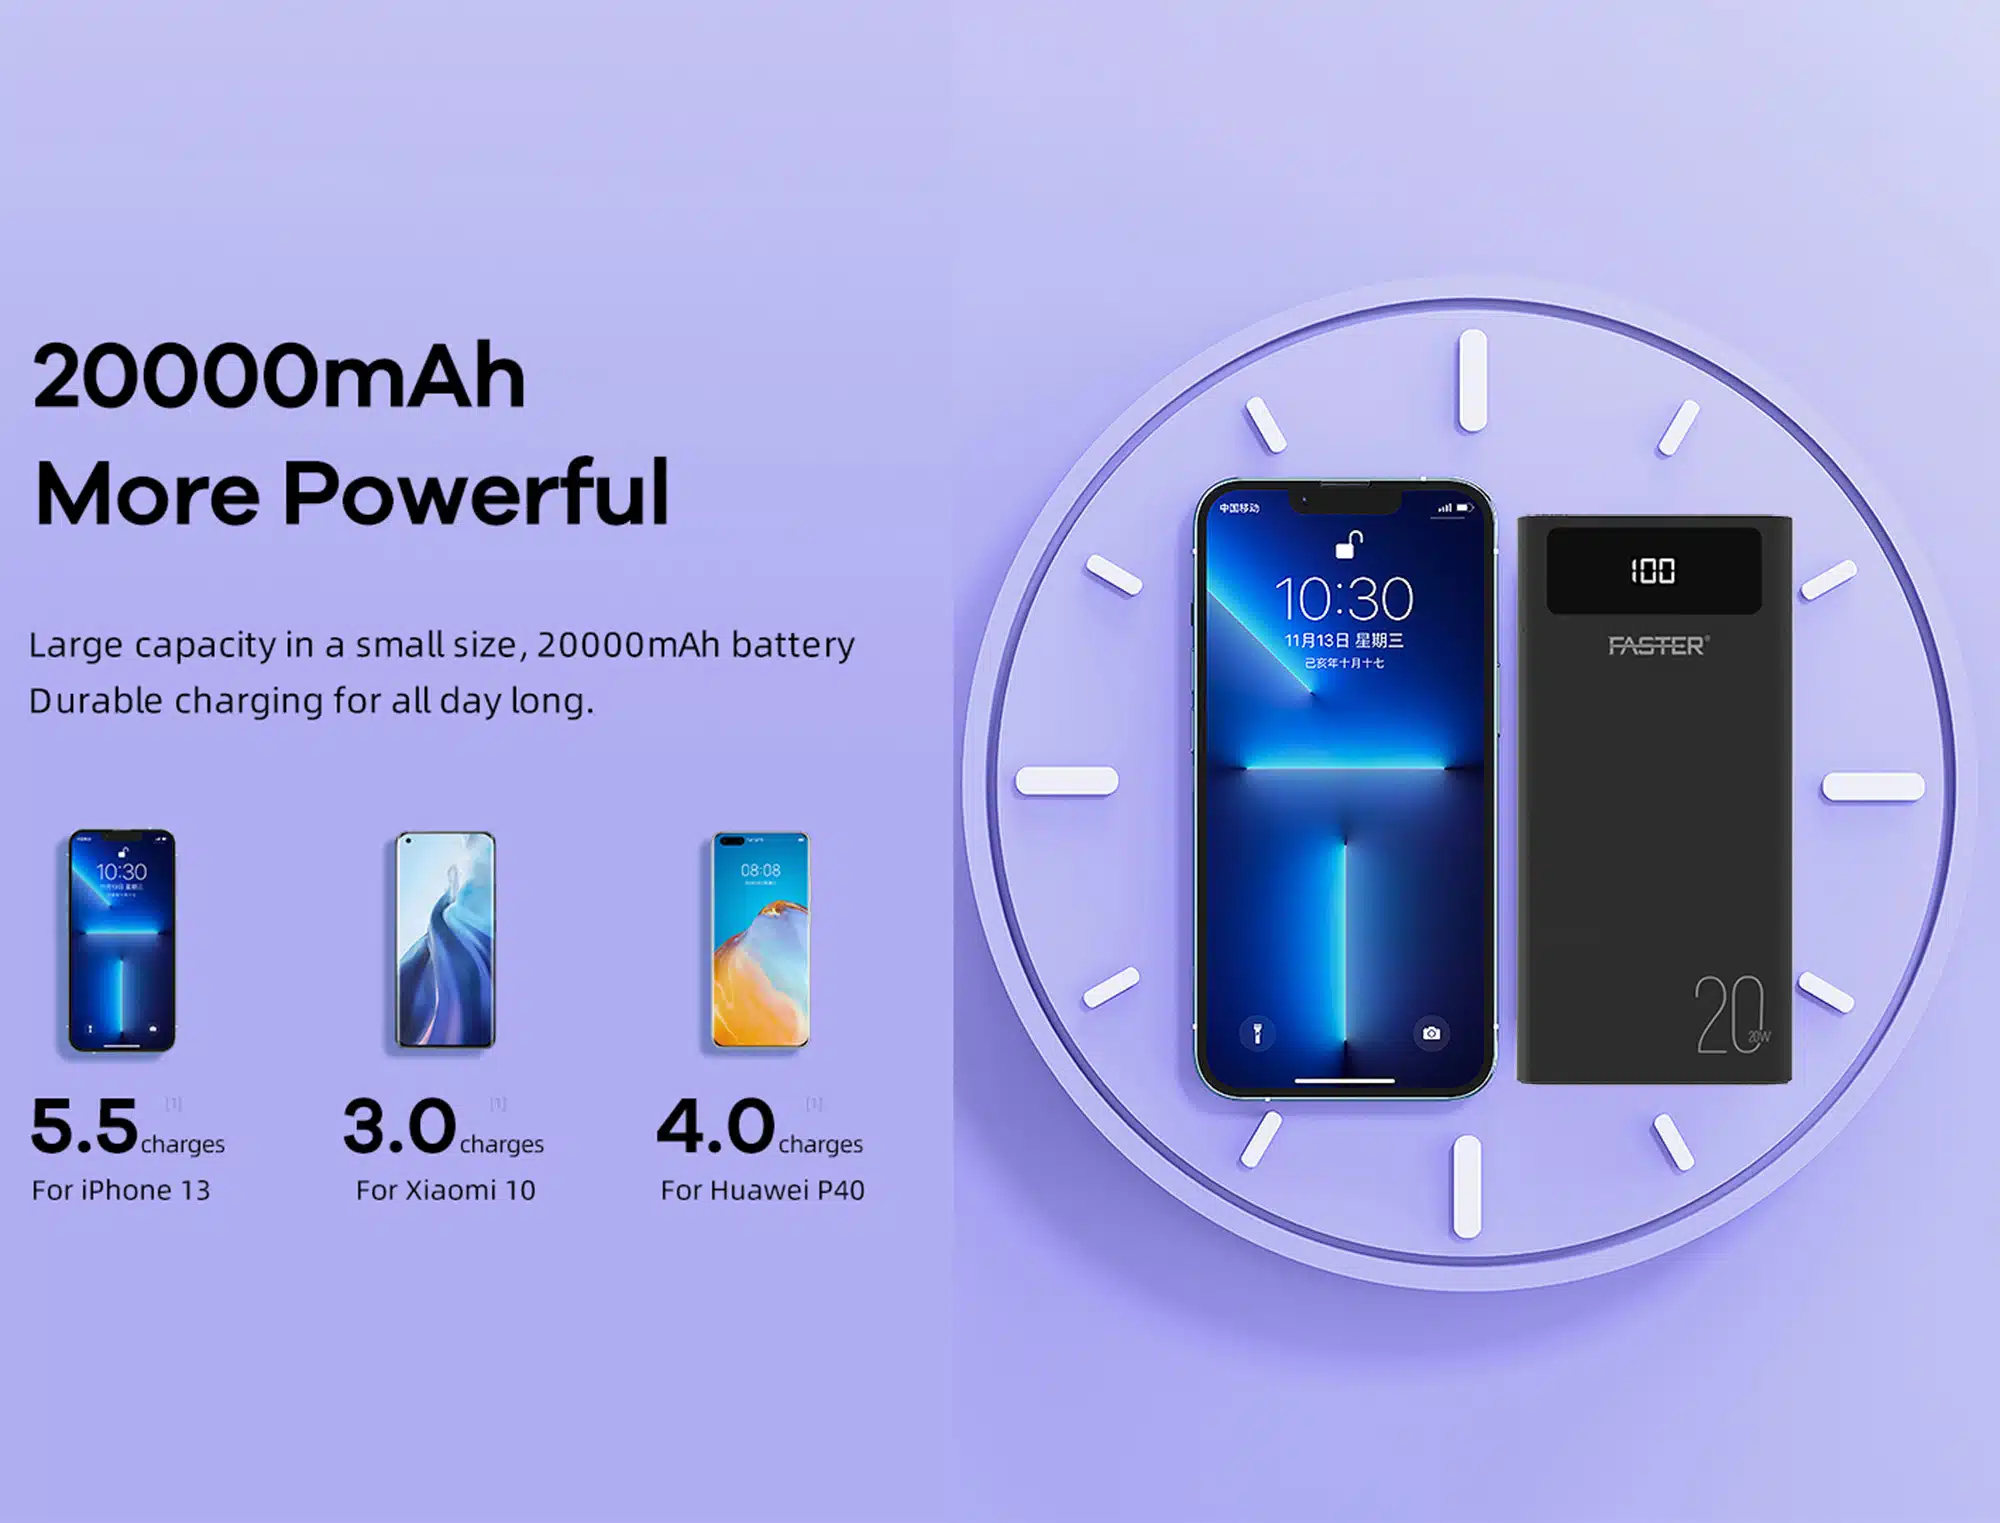 FASTER- S20- PD-20W -Qualcomm- Quick -Charge- 3.0- Power- Bank -20000- mAh- with- Digital- Display